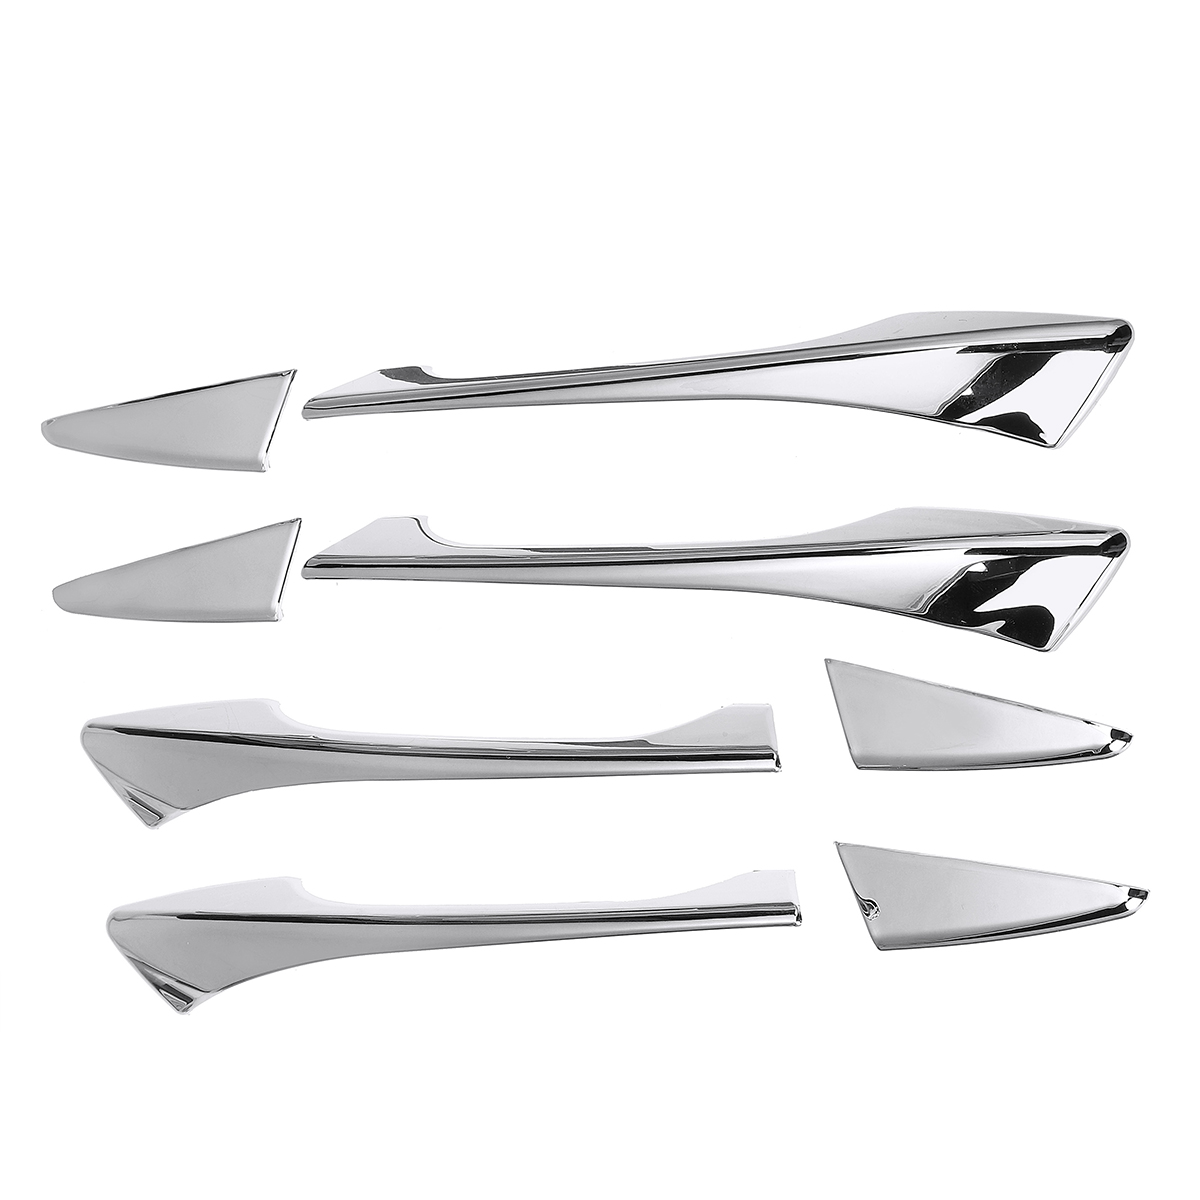 8PCS Chrome Car Side Door Handle Cover Trim for Acura TLX 2015-2018